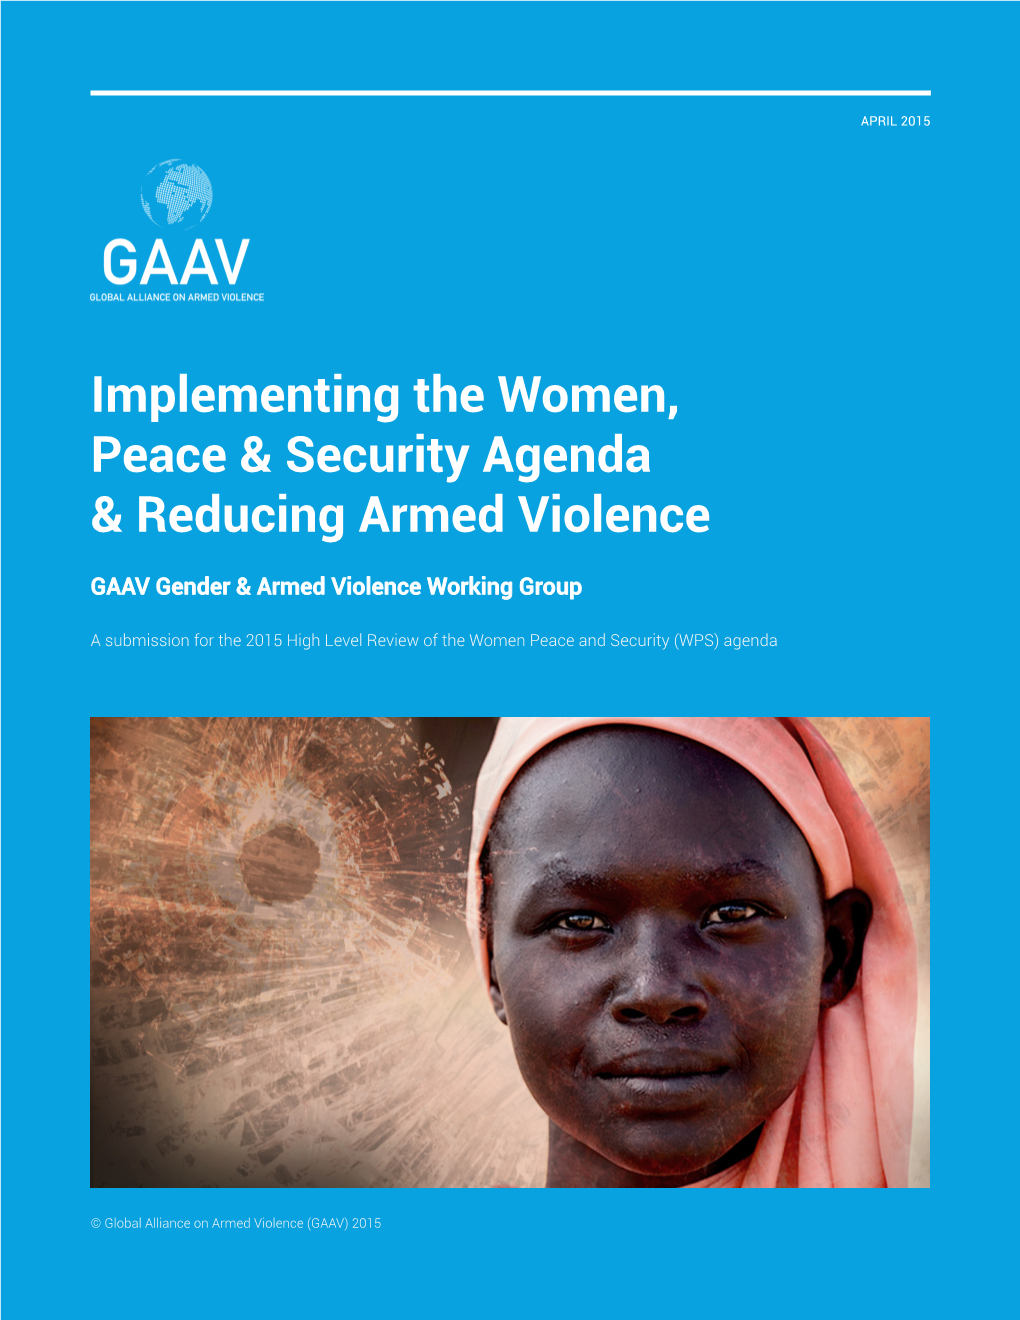 Implementing the Women, Peace and Security Agenda and Reducing